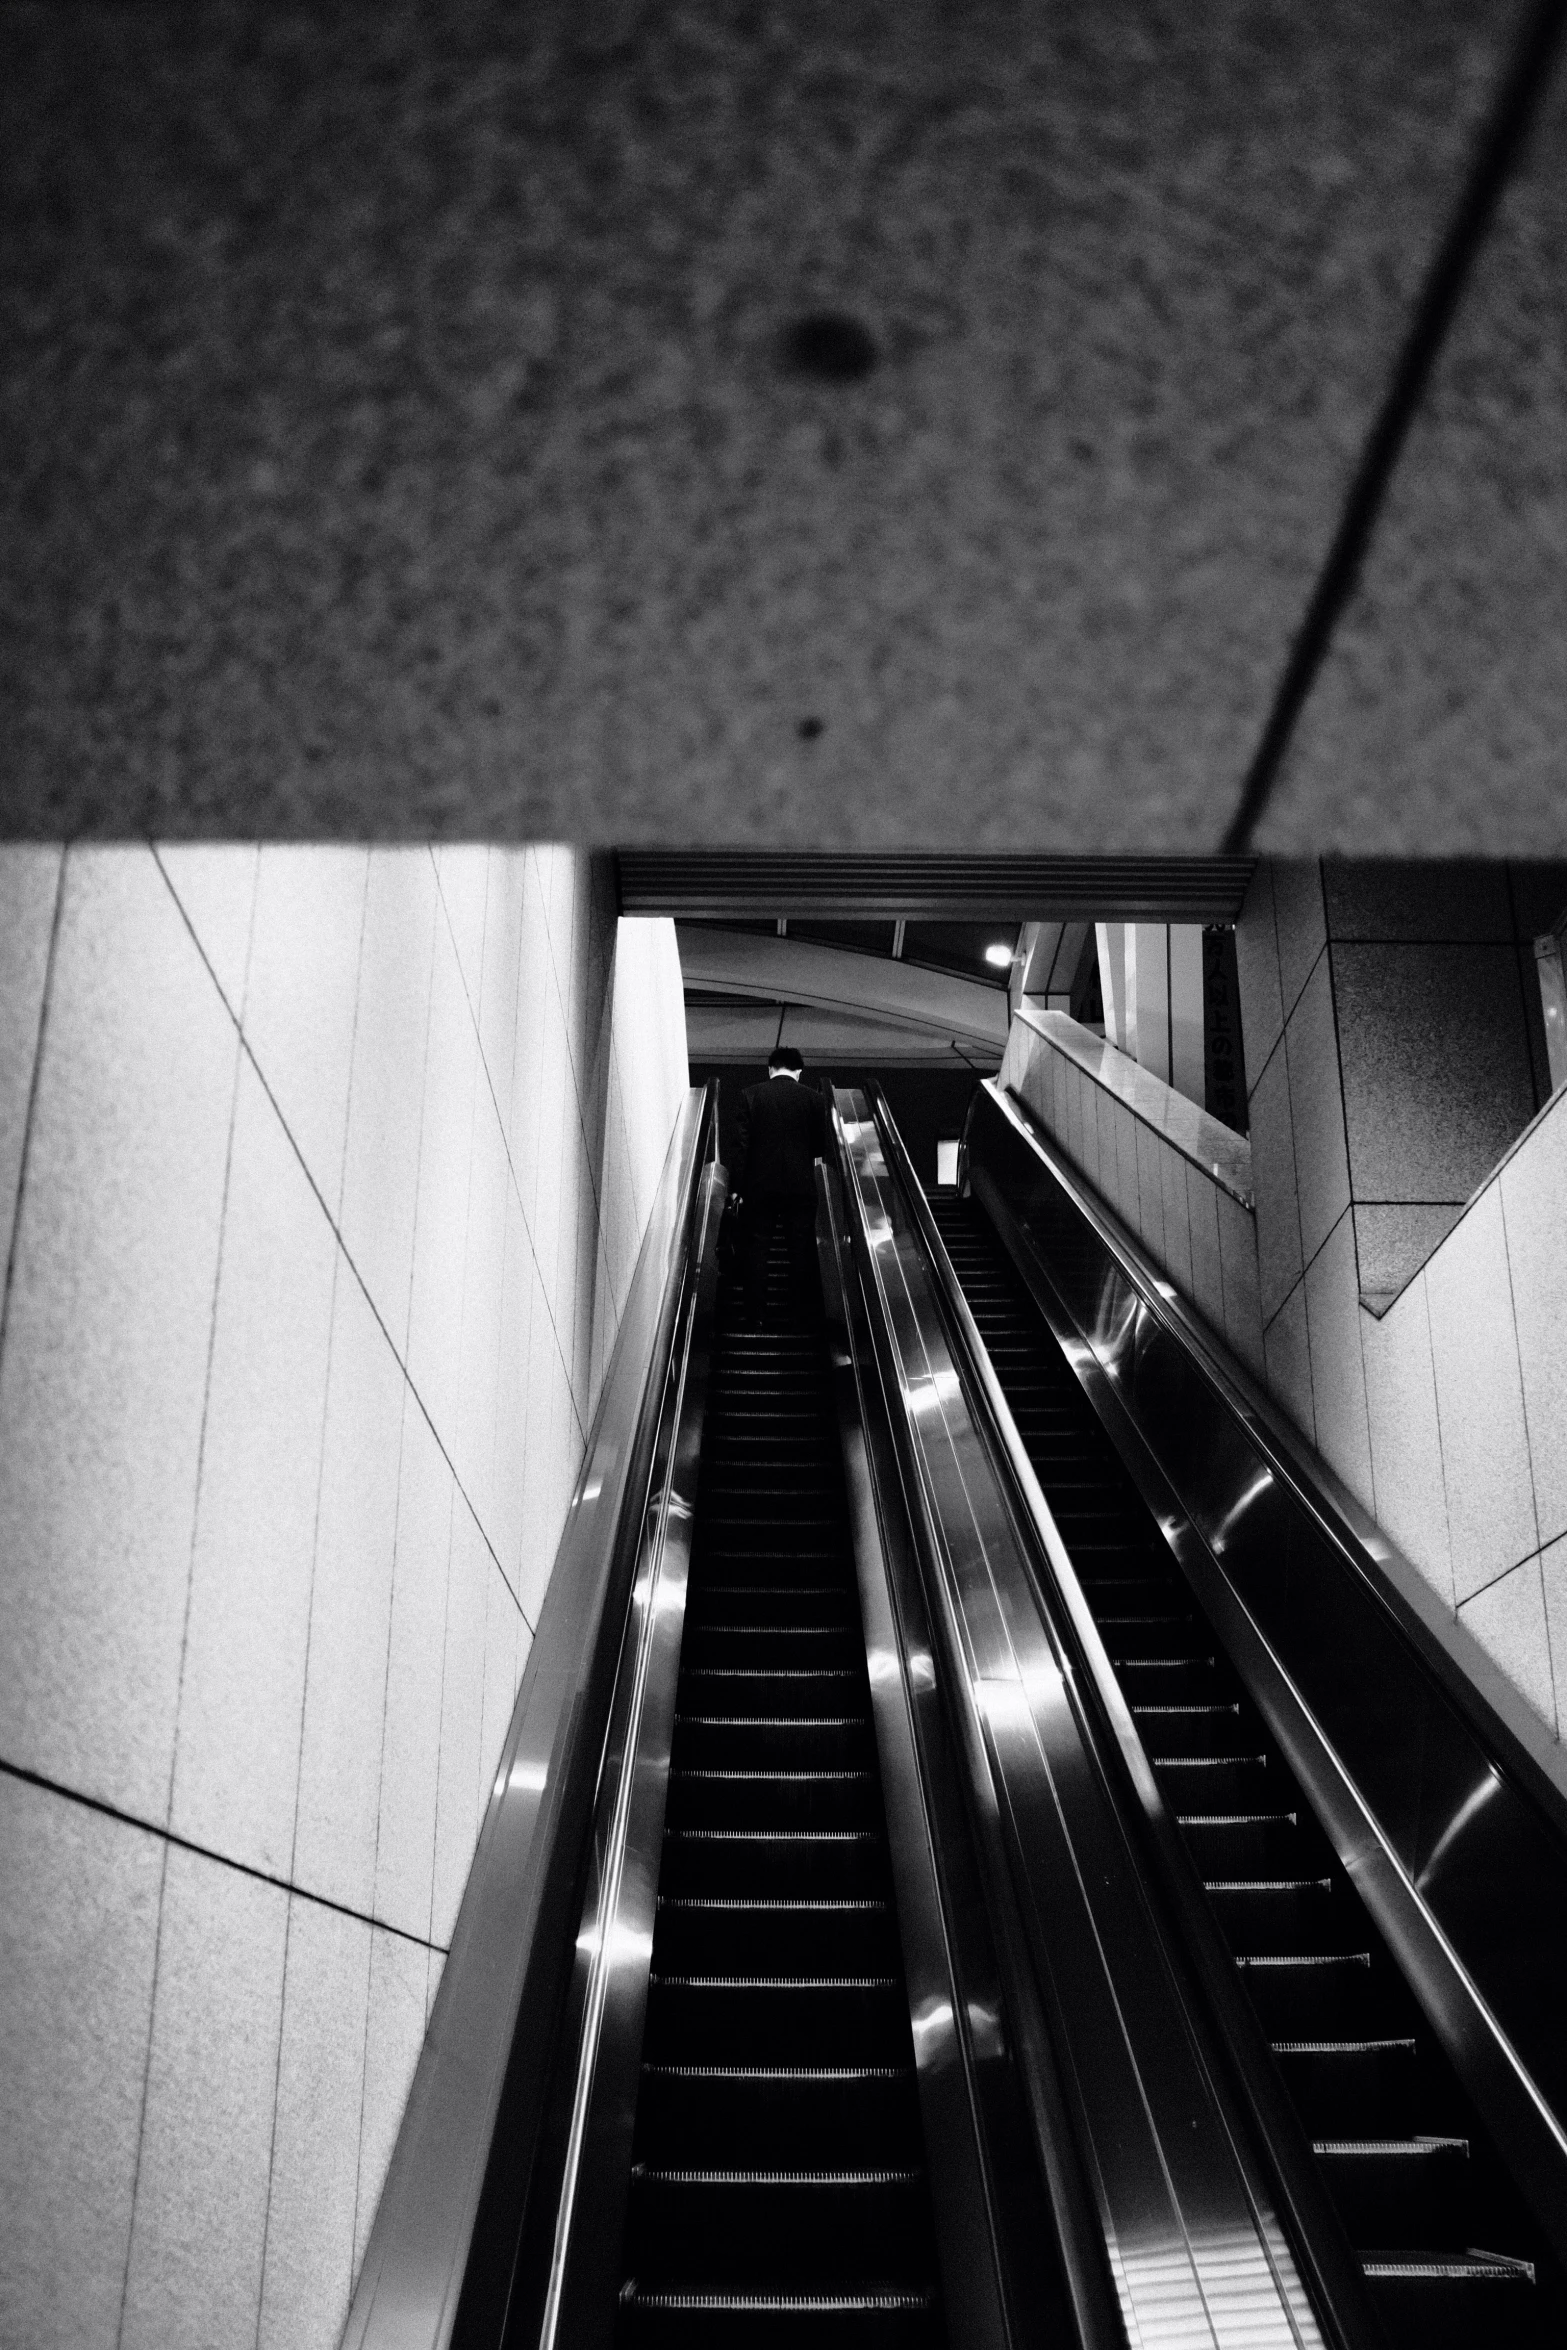 an escalator is shown in a very dark place